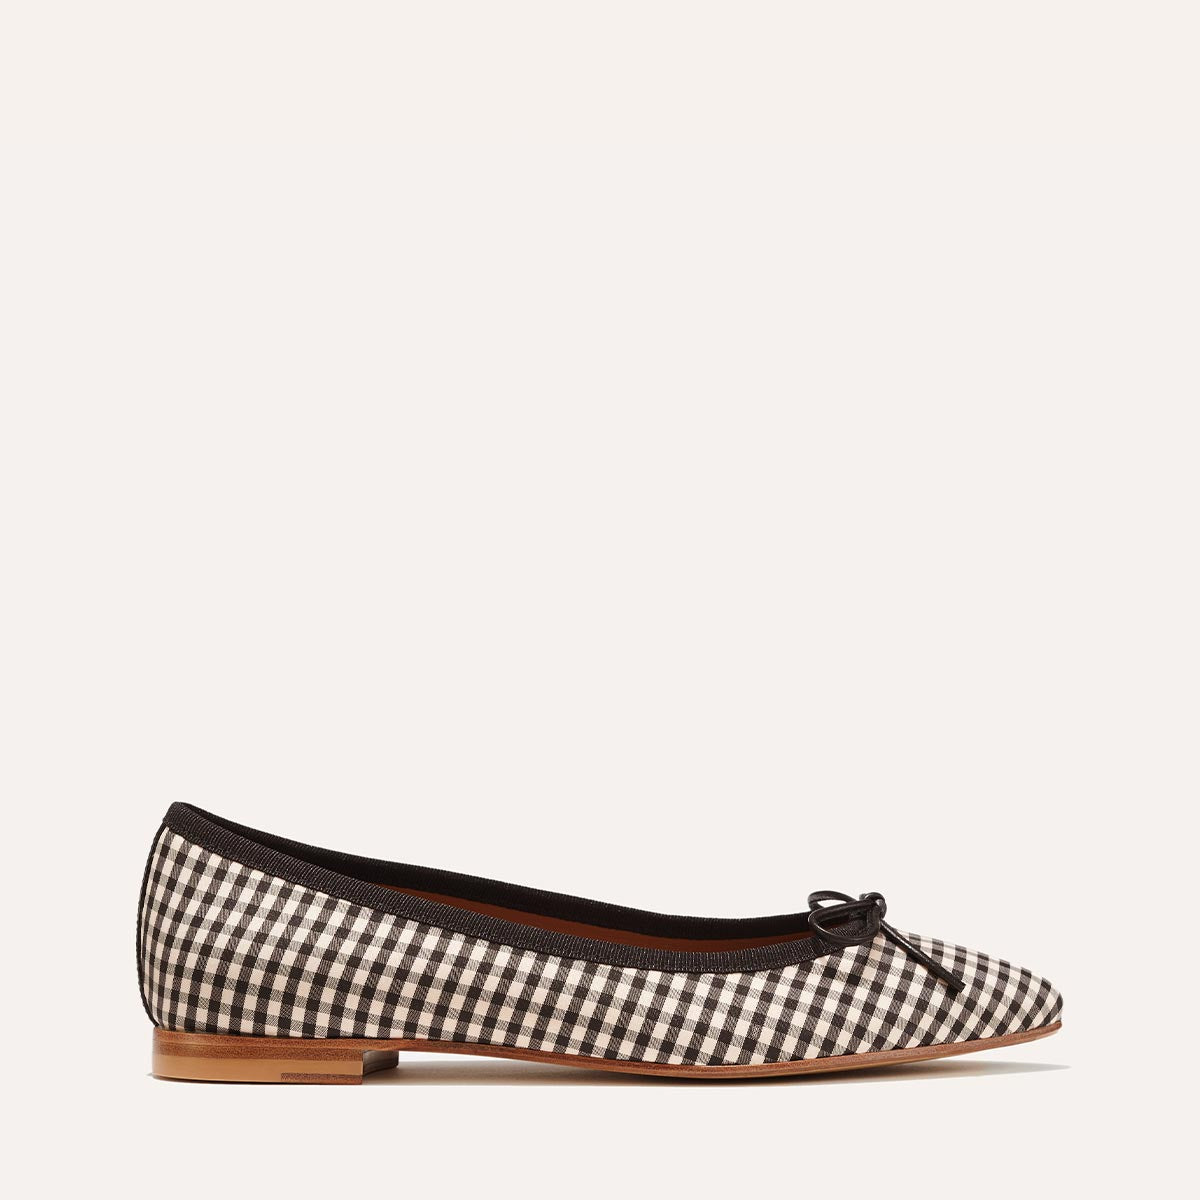 Margaux's classic and comfortable Pointe ballet flat in tan and black gingham-printed fabric with an elegant pointed toe